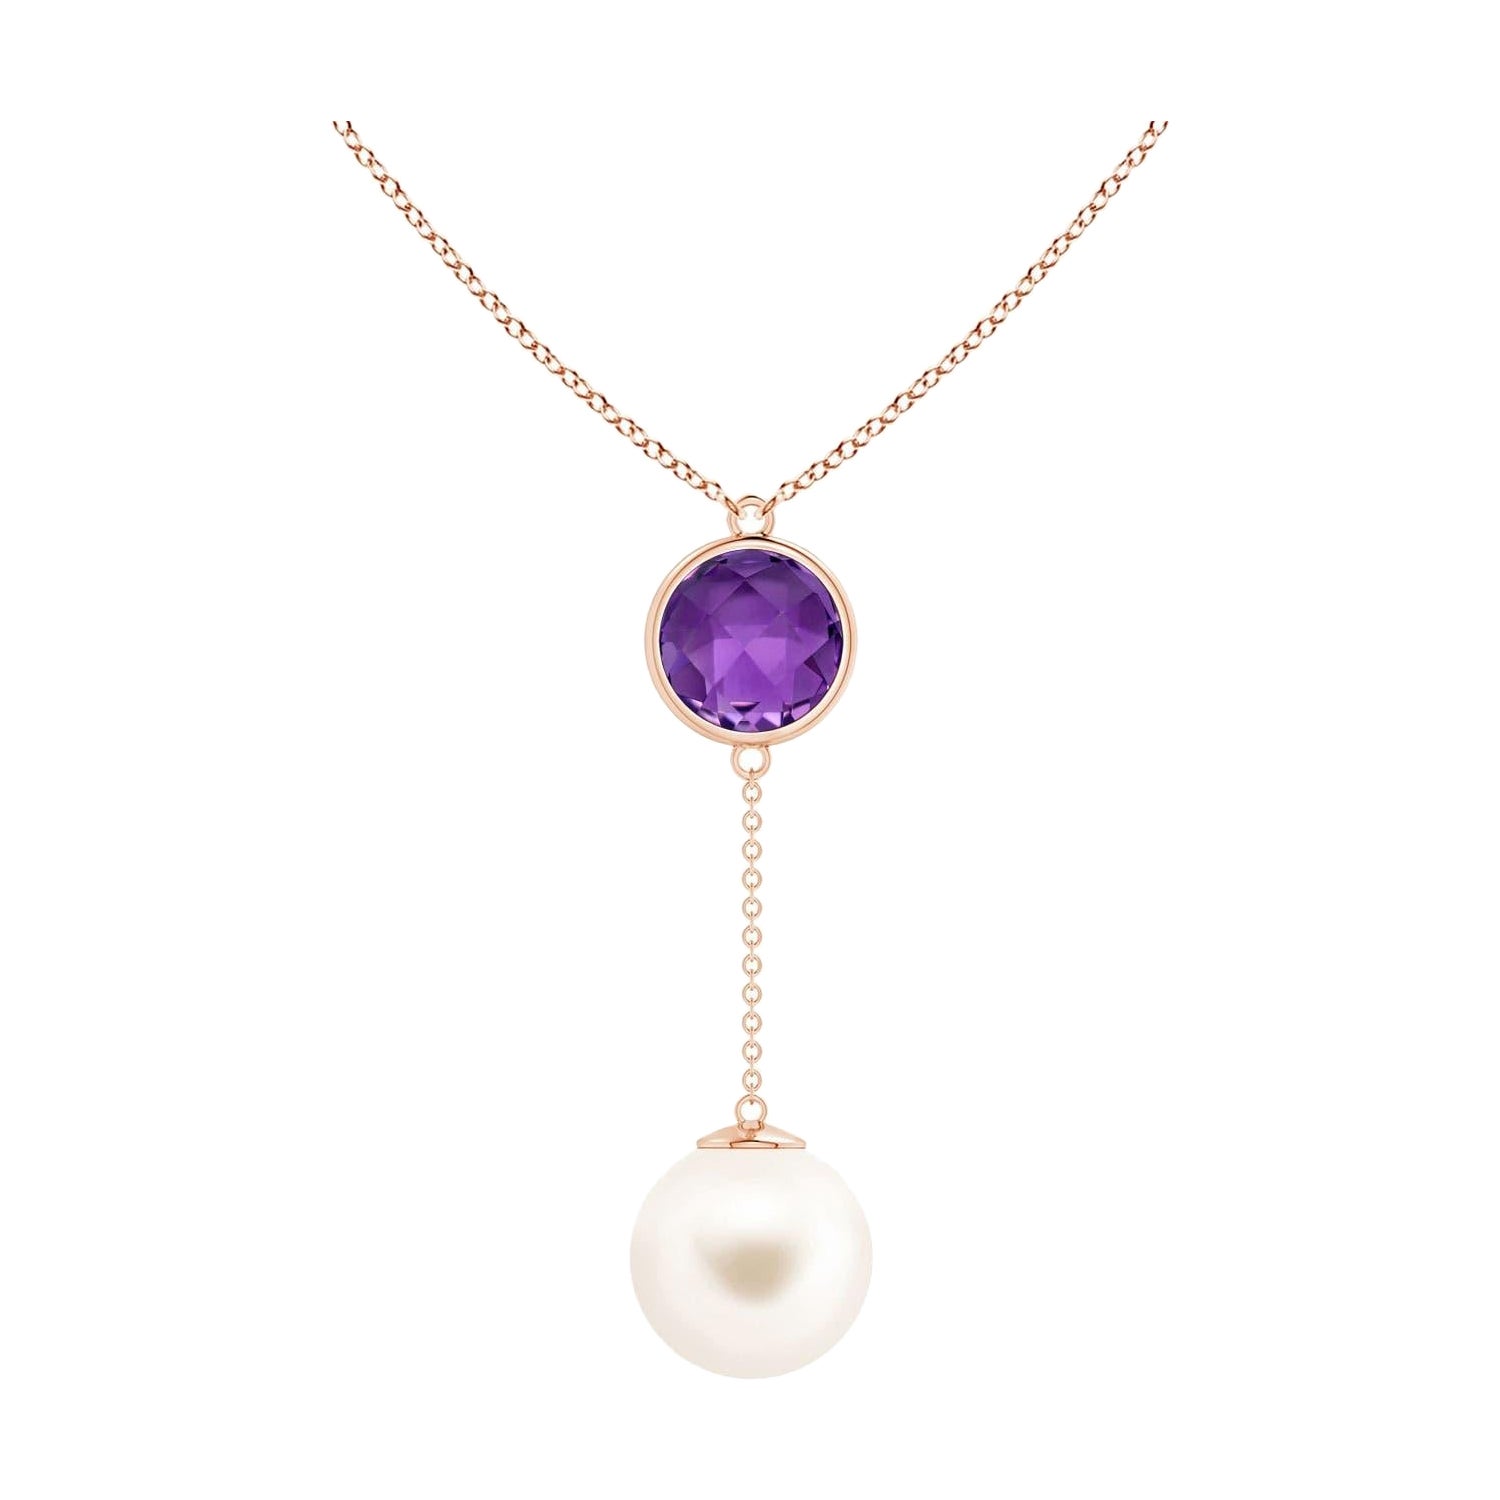 Freshwater Cultured Pearl & 2.85ct Amethyst Lariat Necklace in 14K Rose Gold